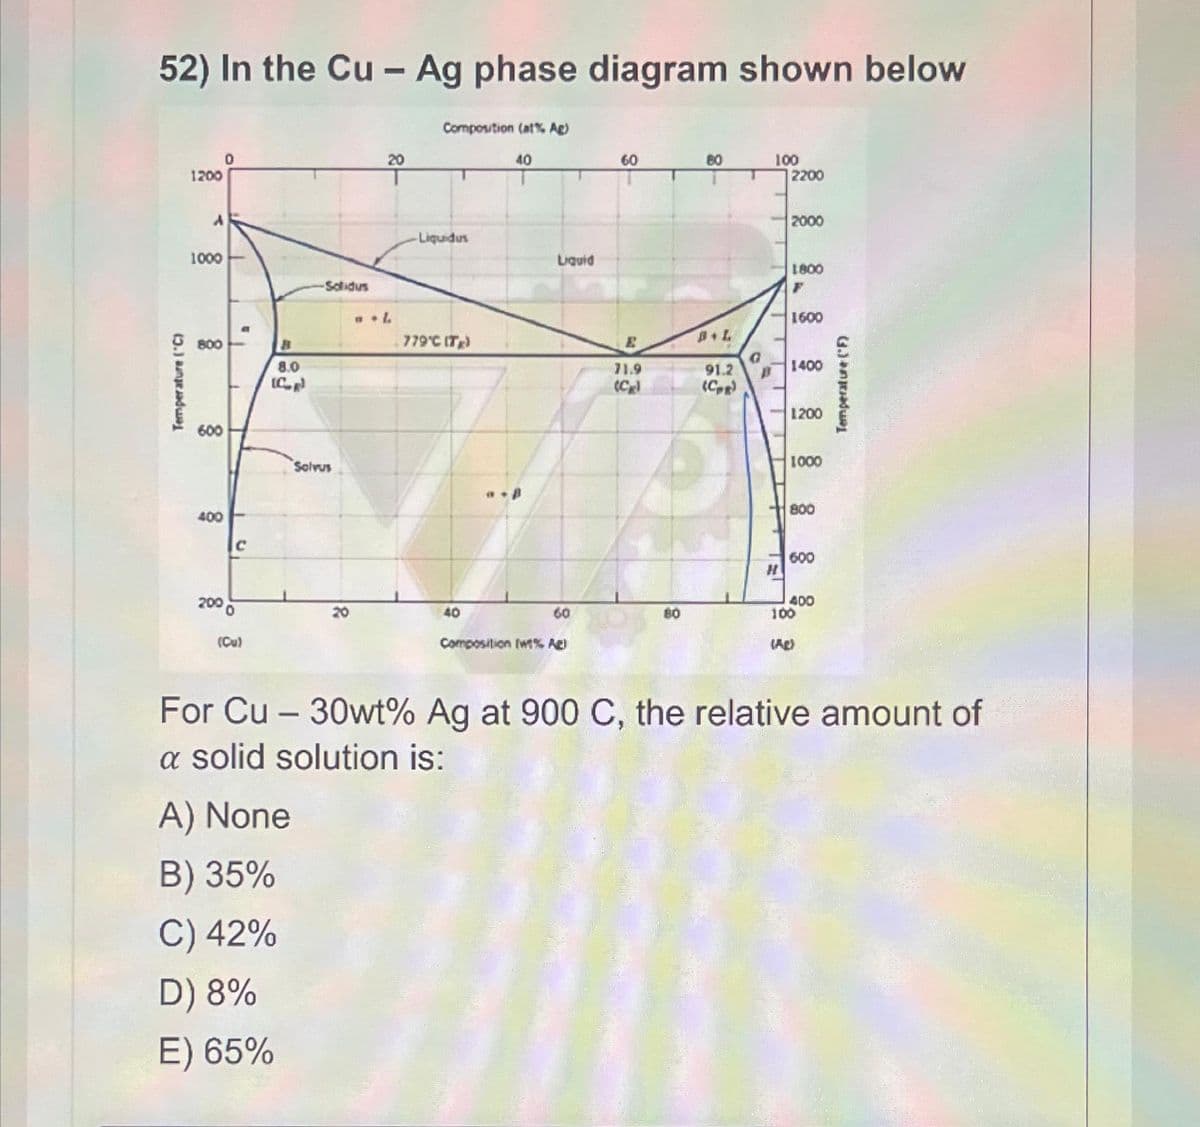 52) In the Cu - Ag phase diagram shown below
Temperature ("C)
1200
A
1000
8
600
400
C
2000
(Cu)
8.0
IC
-Solidus
A) None
B) 35%
C) 42%
D) 8%
E) 65%
Solvus
H.L
Composition (at % Ag)
-Liquidus
779°C (T)
40
40
a p
Liquid
60
Composition (wt% Acl
60
71.9
80
80
BAL
91.2
(CPR)
100
2200
2000
1800
1600
1400
1200
1000
800
600
400
100
(AD)
Temperature (F)
For Cu - 30wt% Ag at 900 C, the relative amount of
a solid solution is: